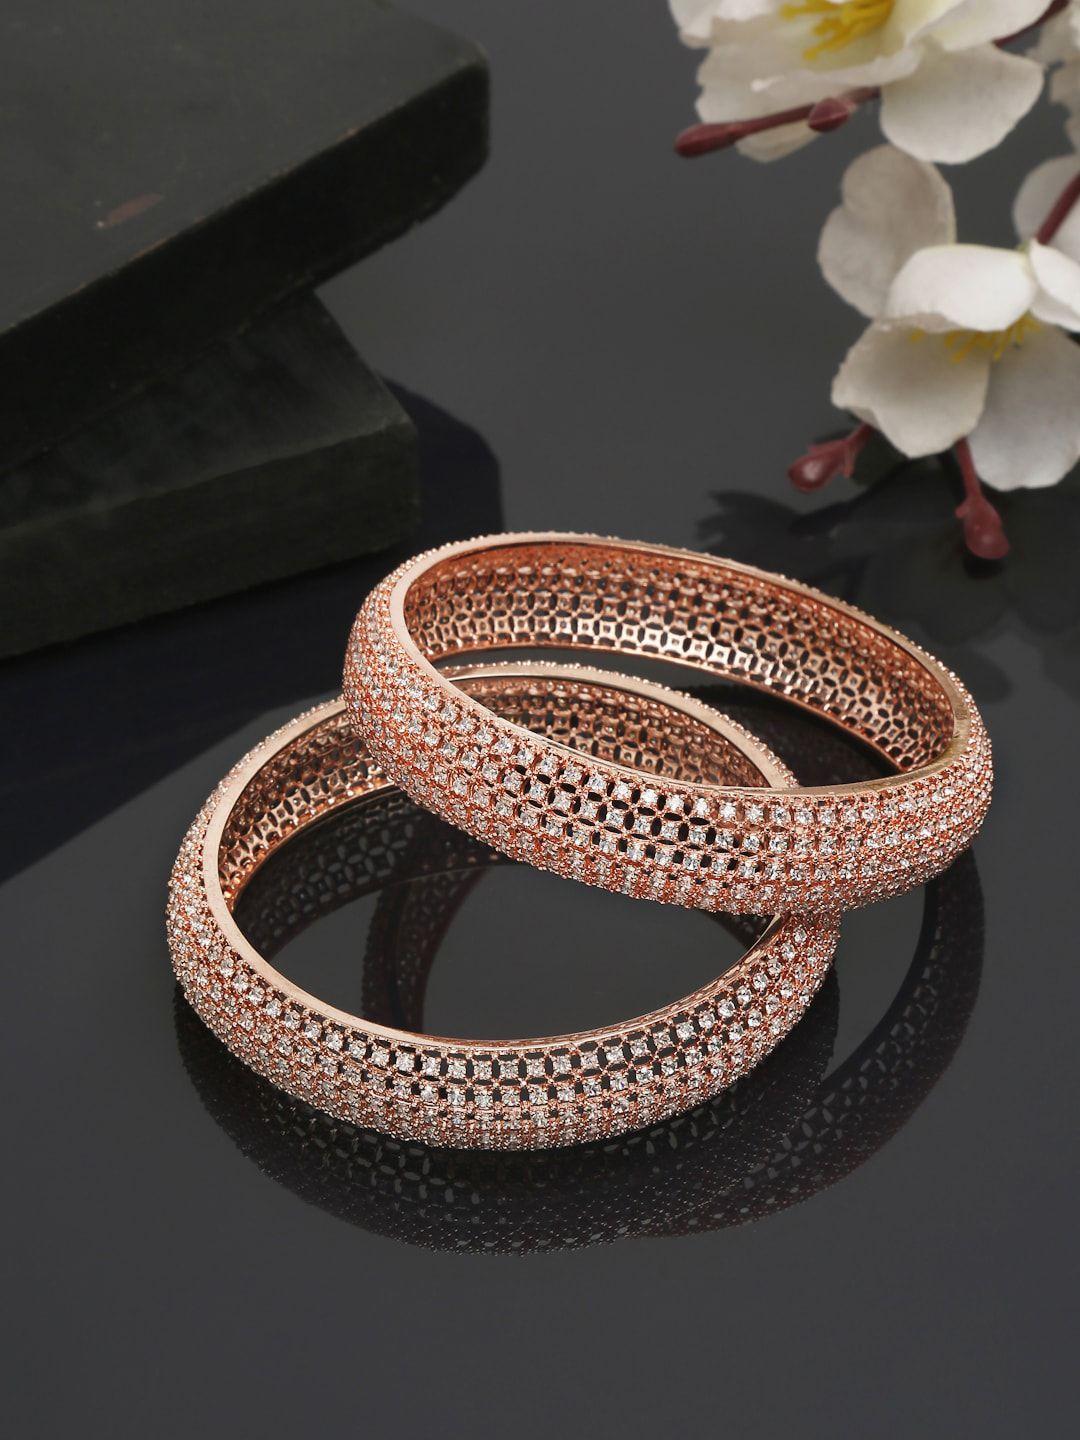 youbella set of 2 rose gold-plated  & stones-studded bangles